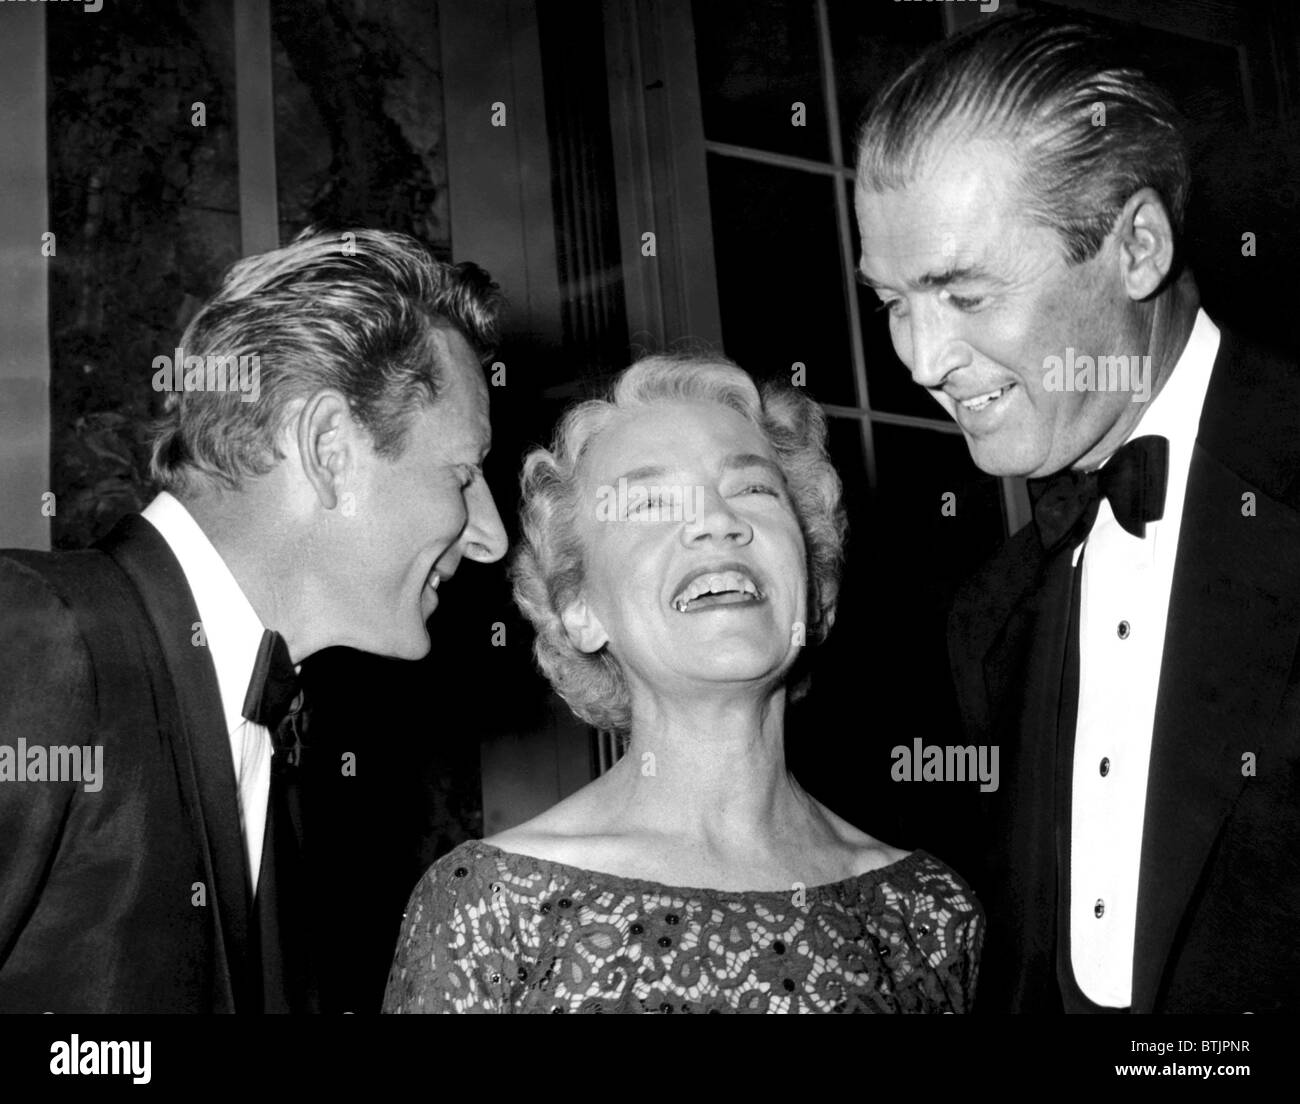 Danny Kaye, Senator Margaret Chase Smith and James Stewart at the 16th Annual Awards Dinner of the Overseas Press Club of Americ Stock Photo